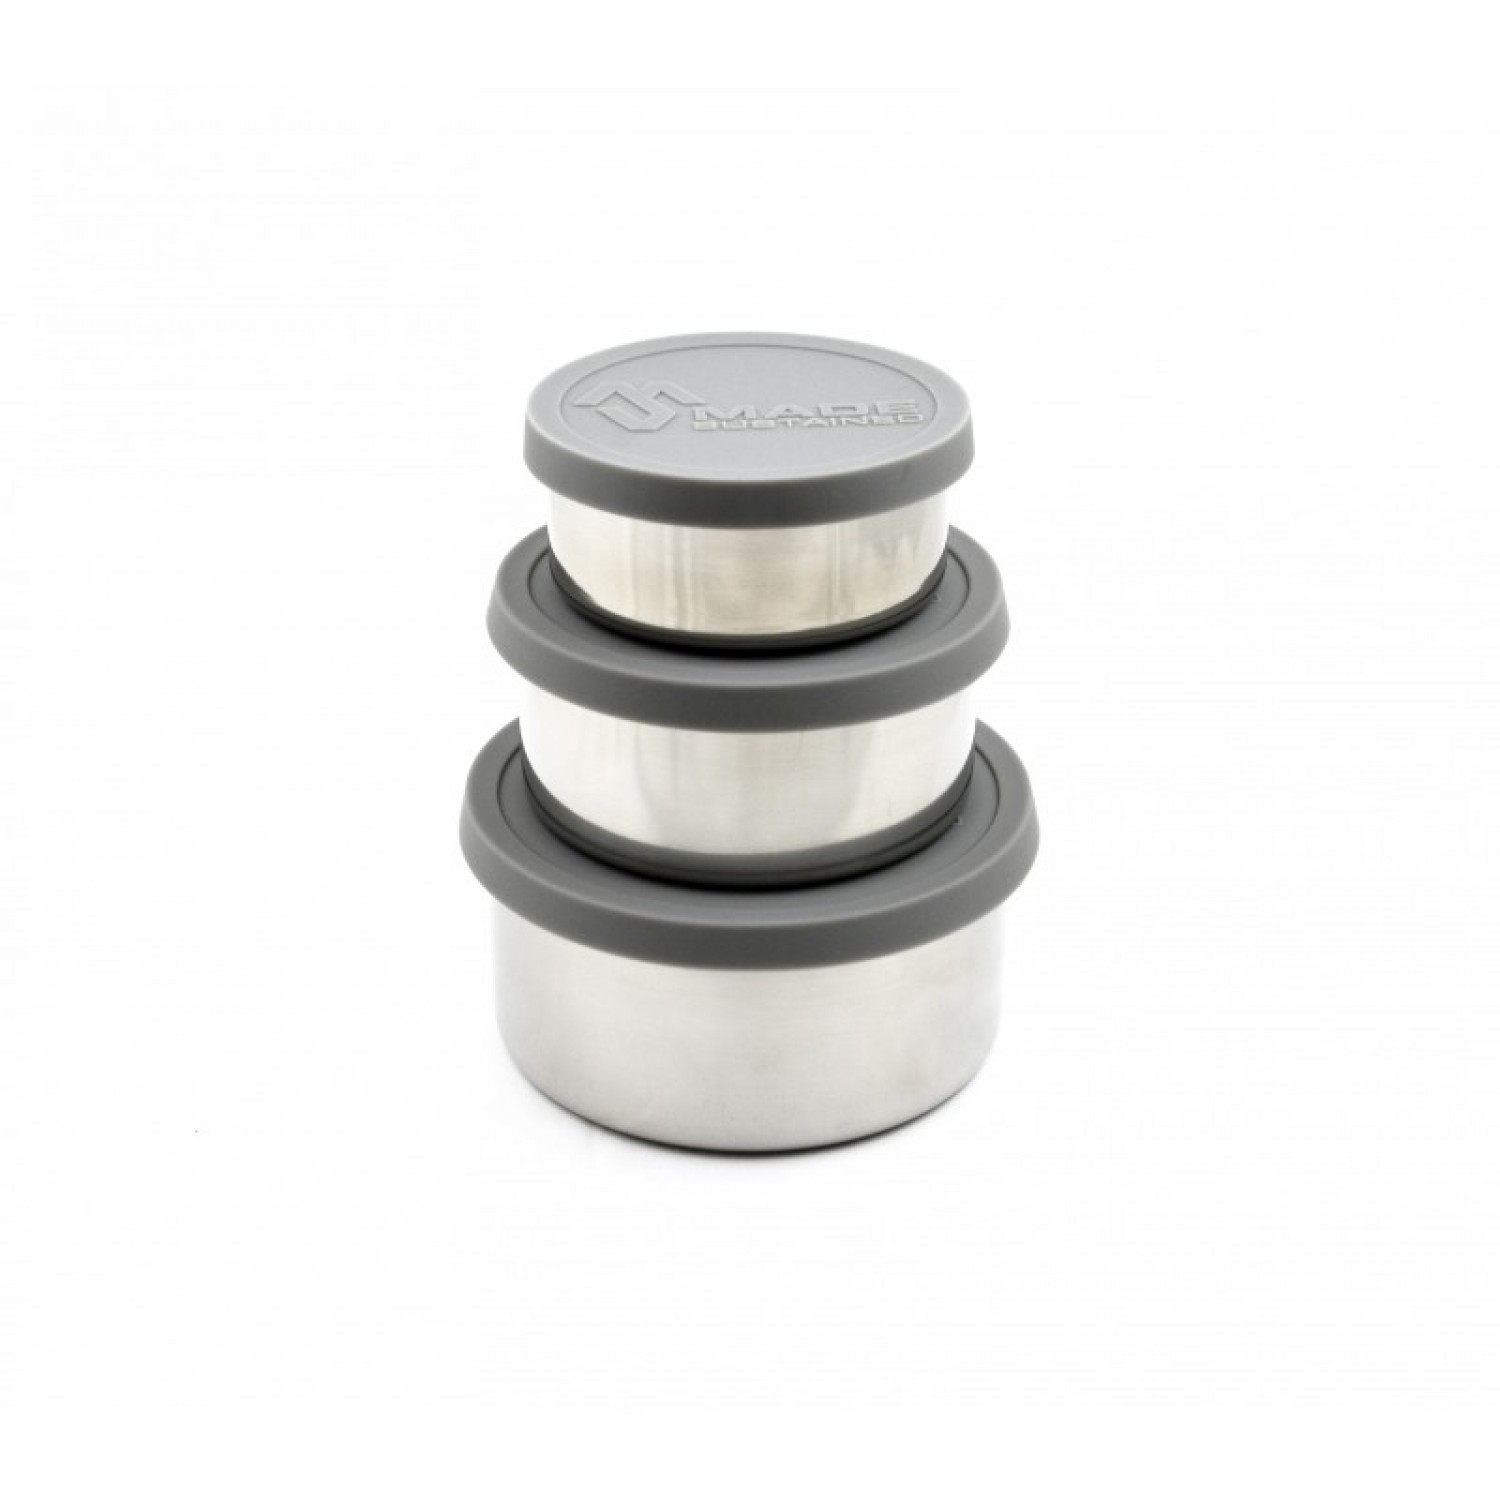 Round stainless steel storage boxes & grey silicone lid